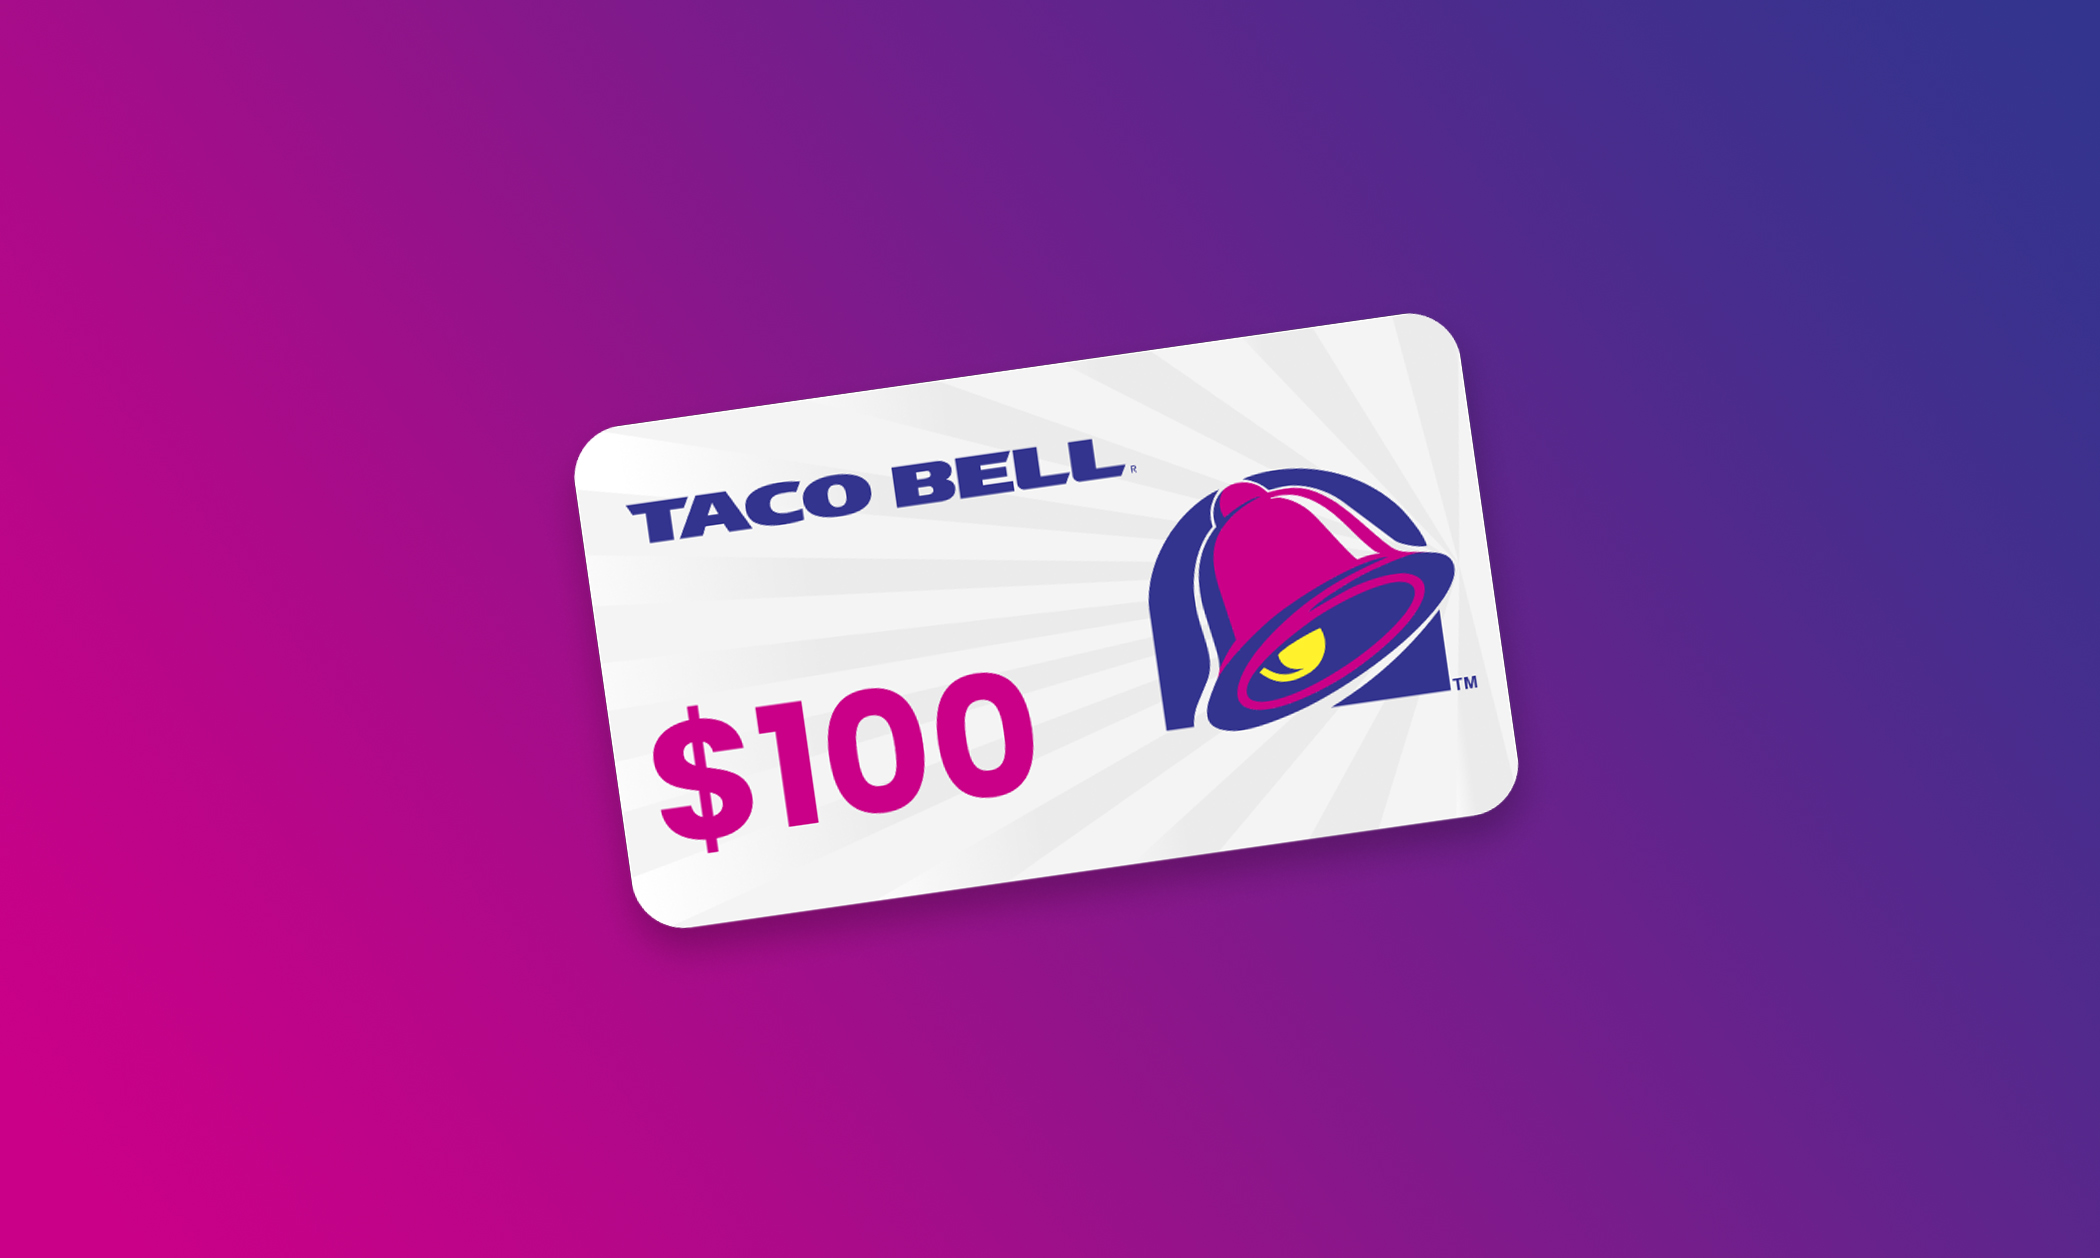 Enter to Win a 100 Taco Bell Gift Card! OKWow Sweepstakes and